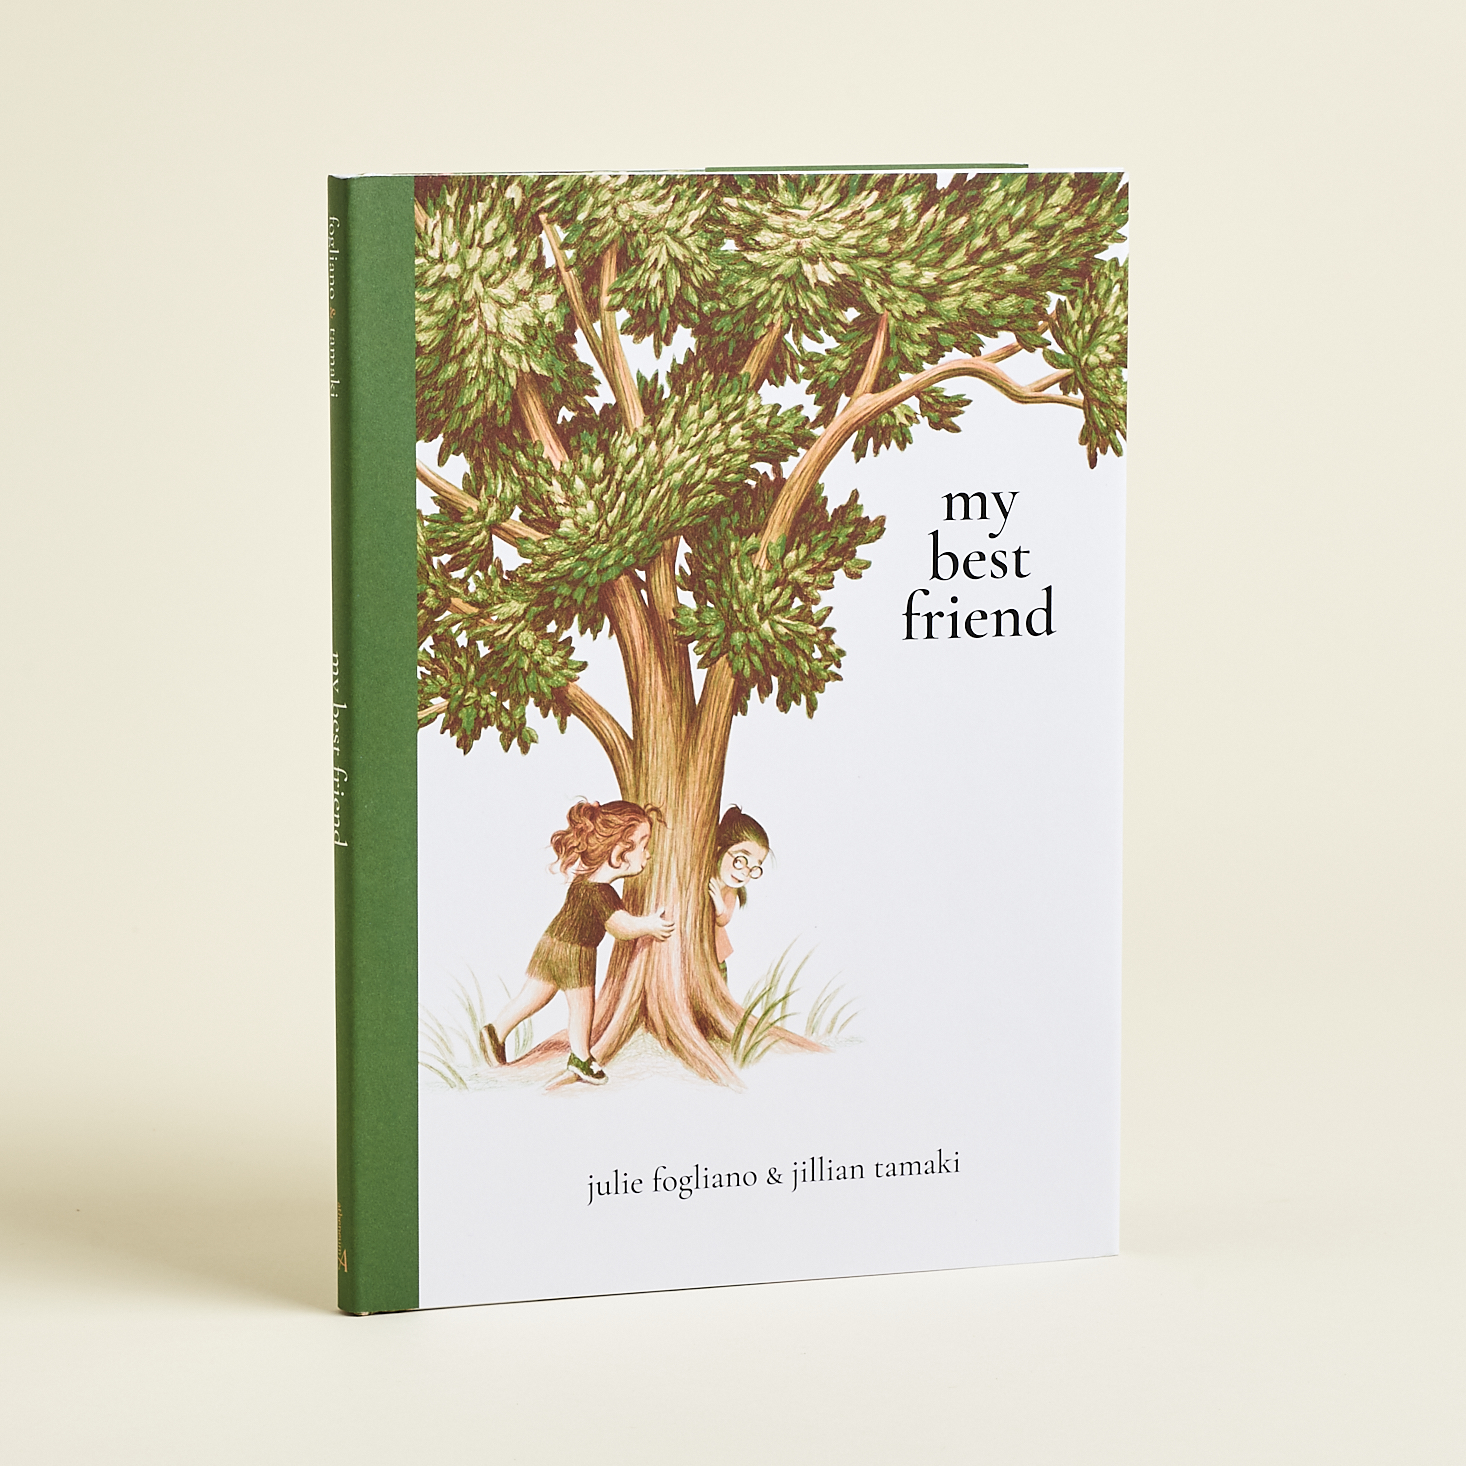 My Best Friend hardback picture book from Little Feminist 2-4 March 2021